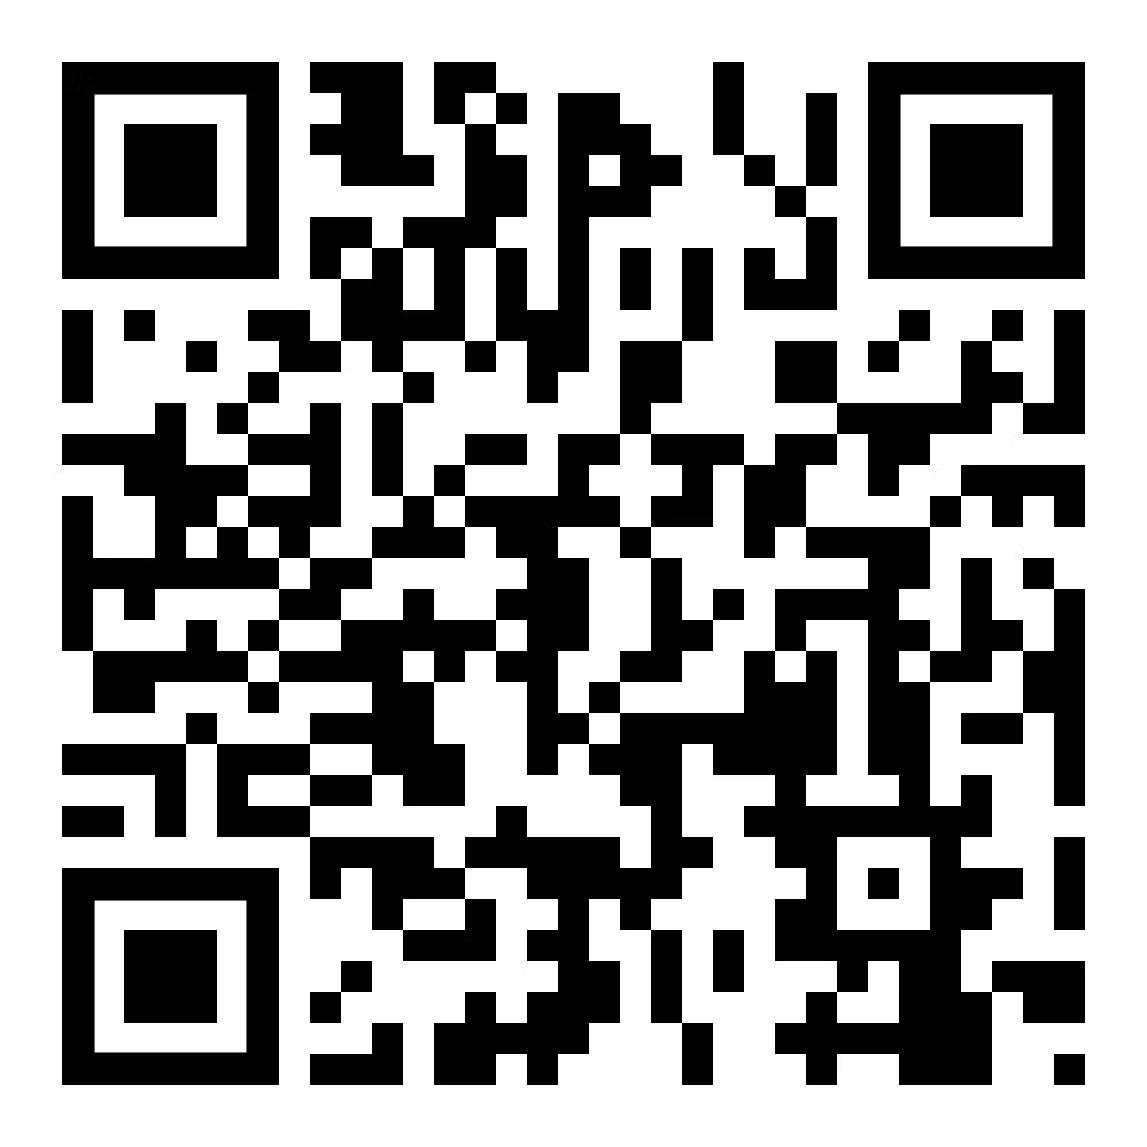 Reach out for help by scanning this QR Code